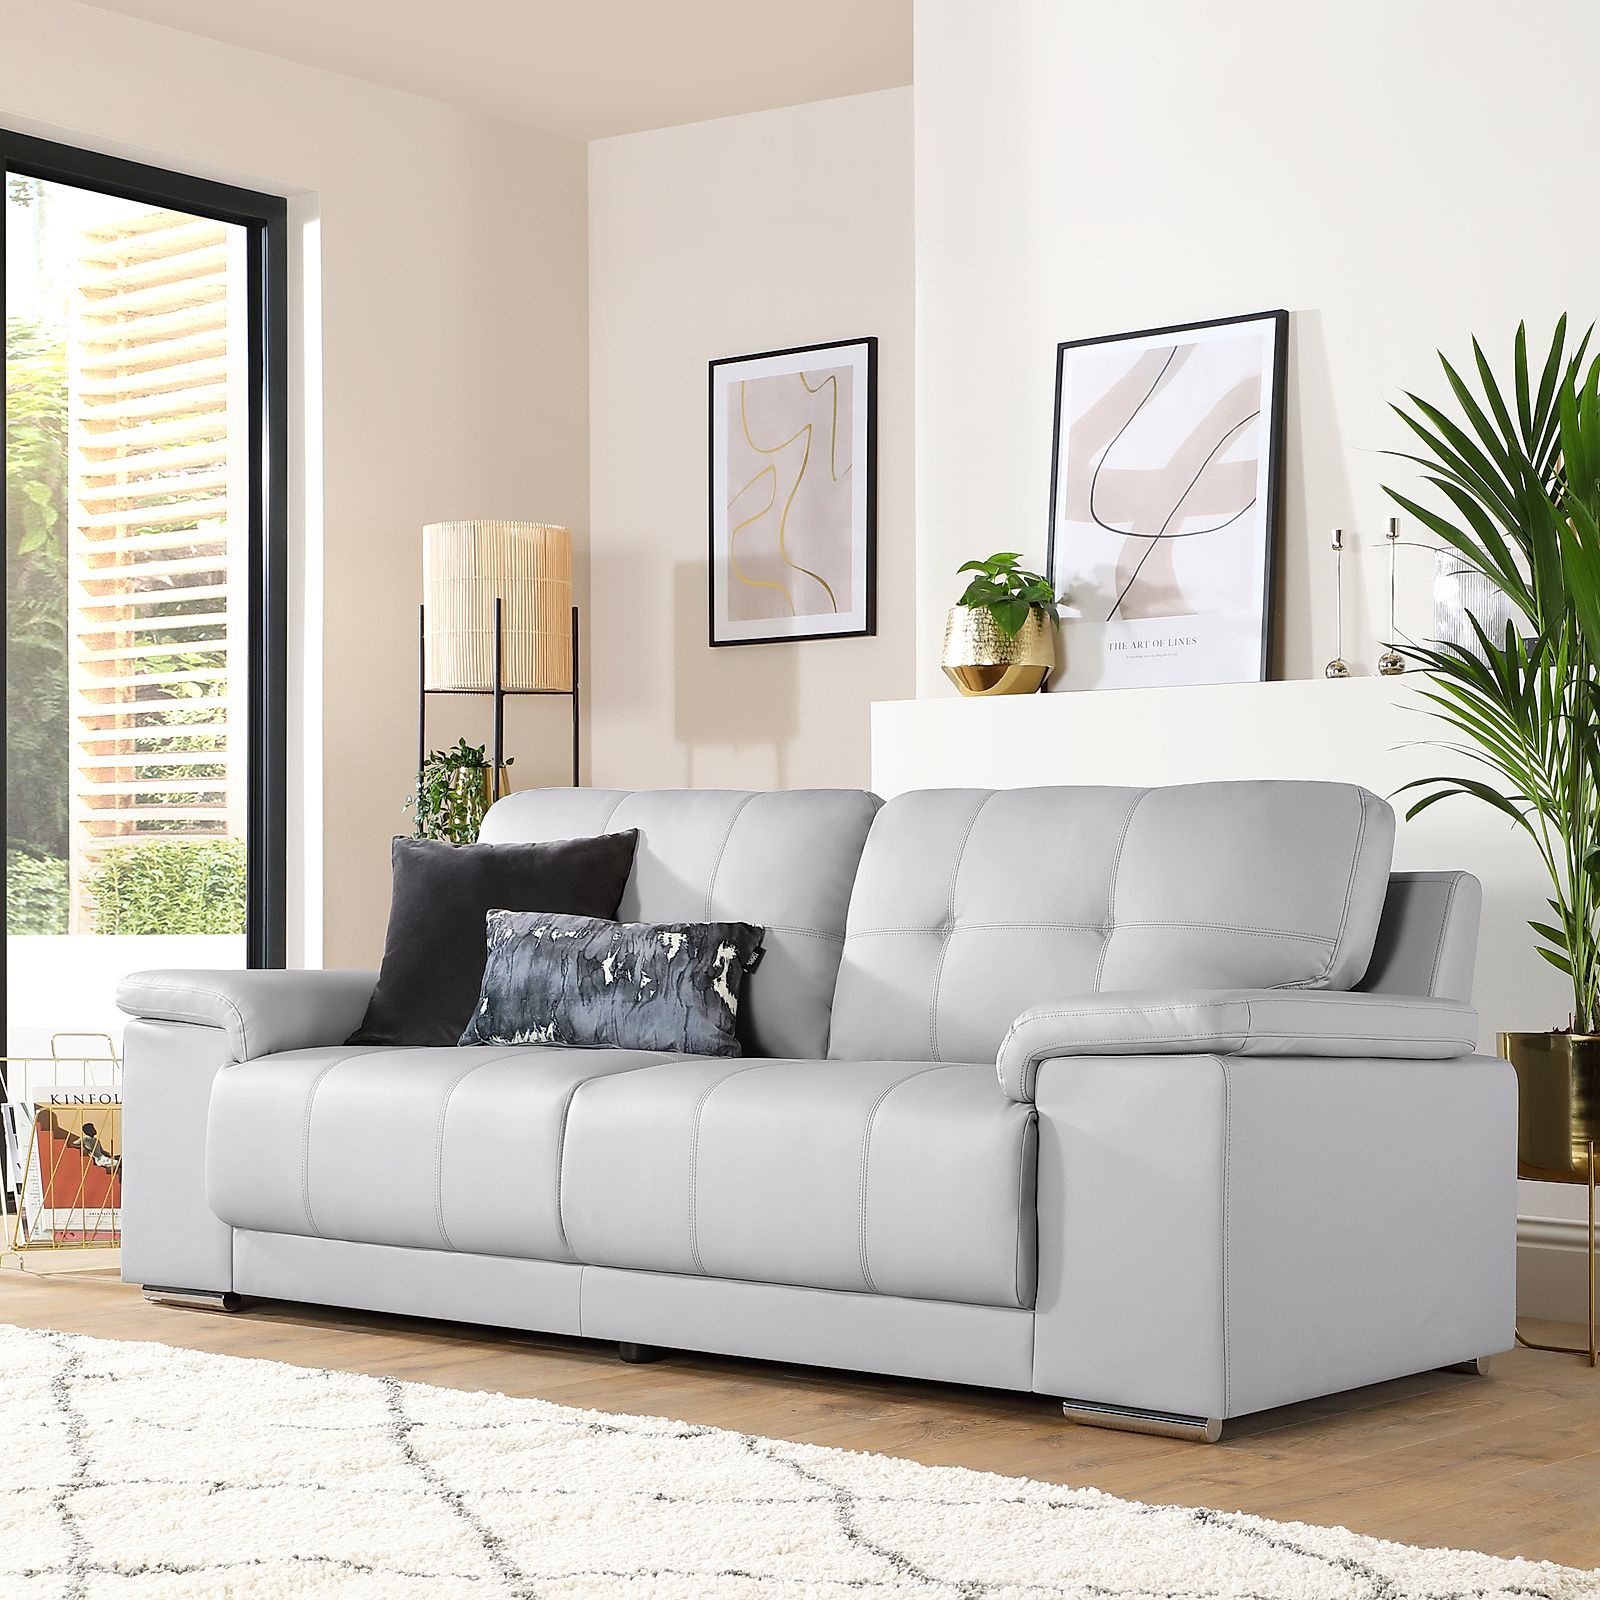 Kansas Light Grey Leather 3 Seater Sofa | Furniture Choice With Regard To Sofas In Light Gray (Gallery 4 of 22)